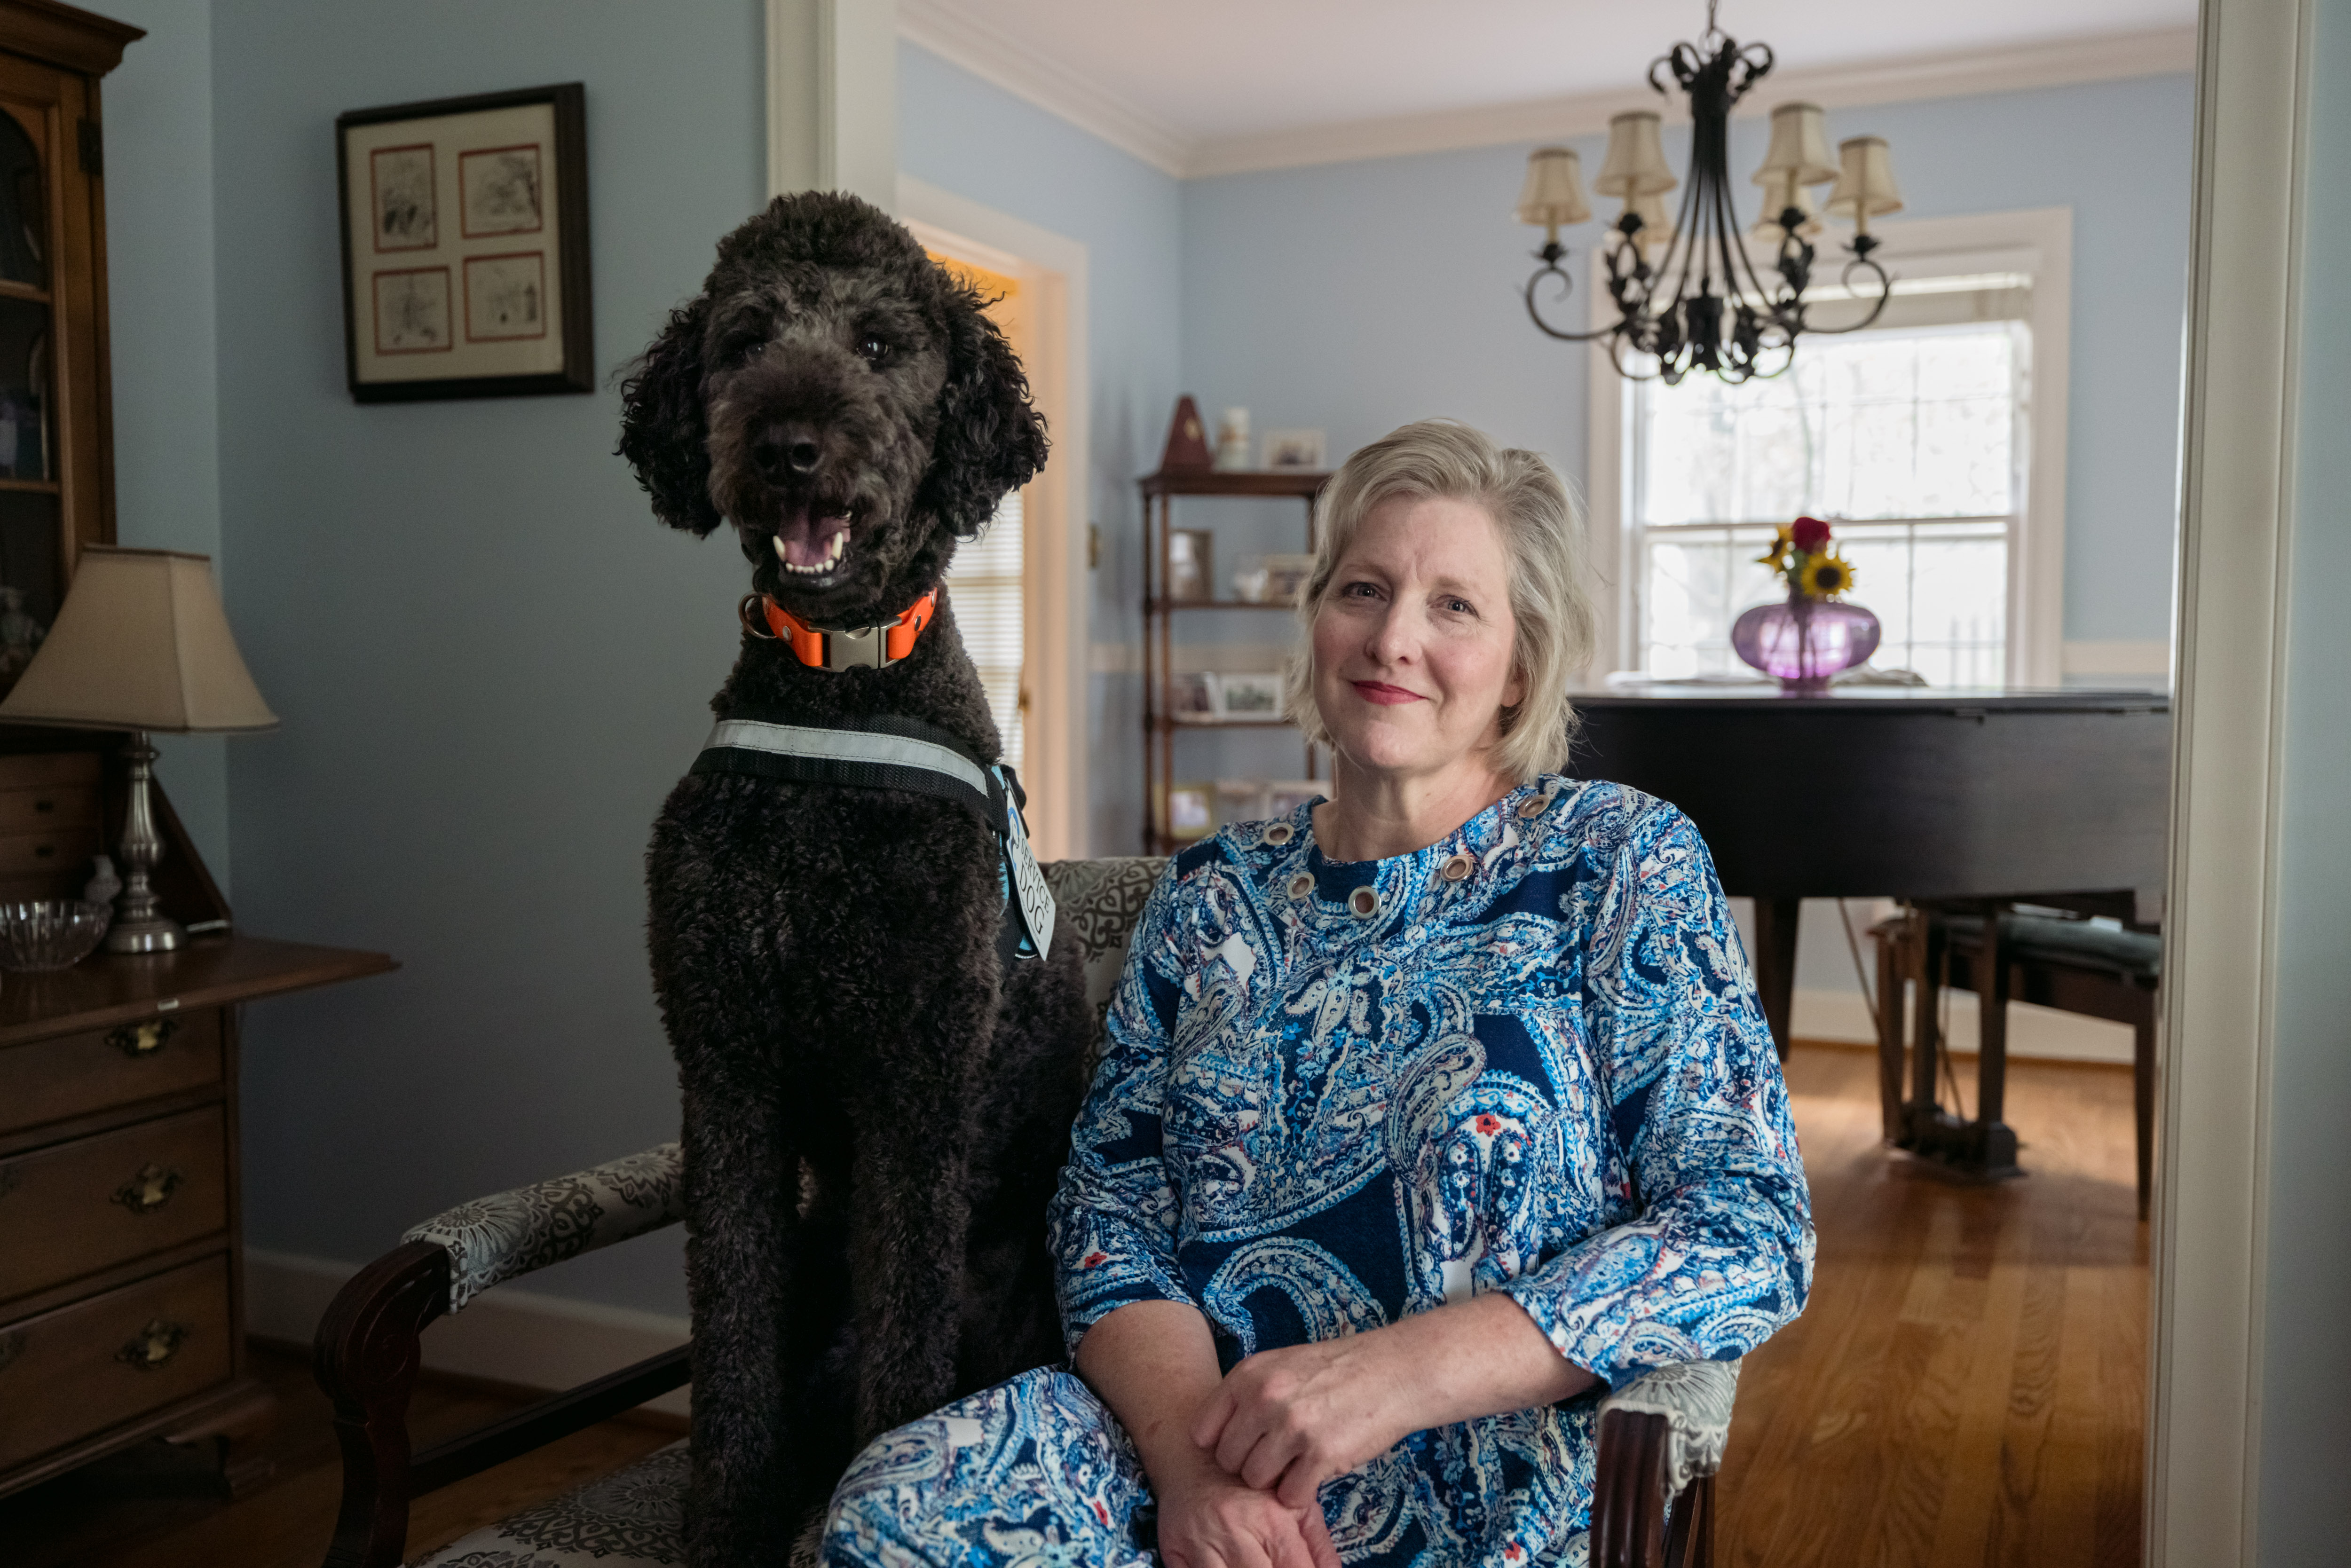 A photograph of Sally Nix sitting beside her service dog in her home.